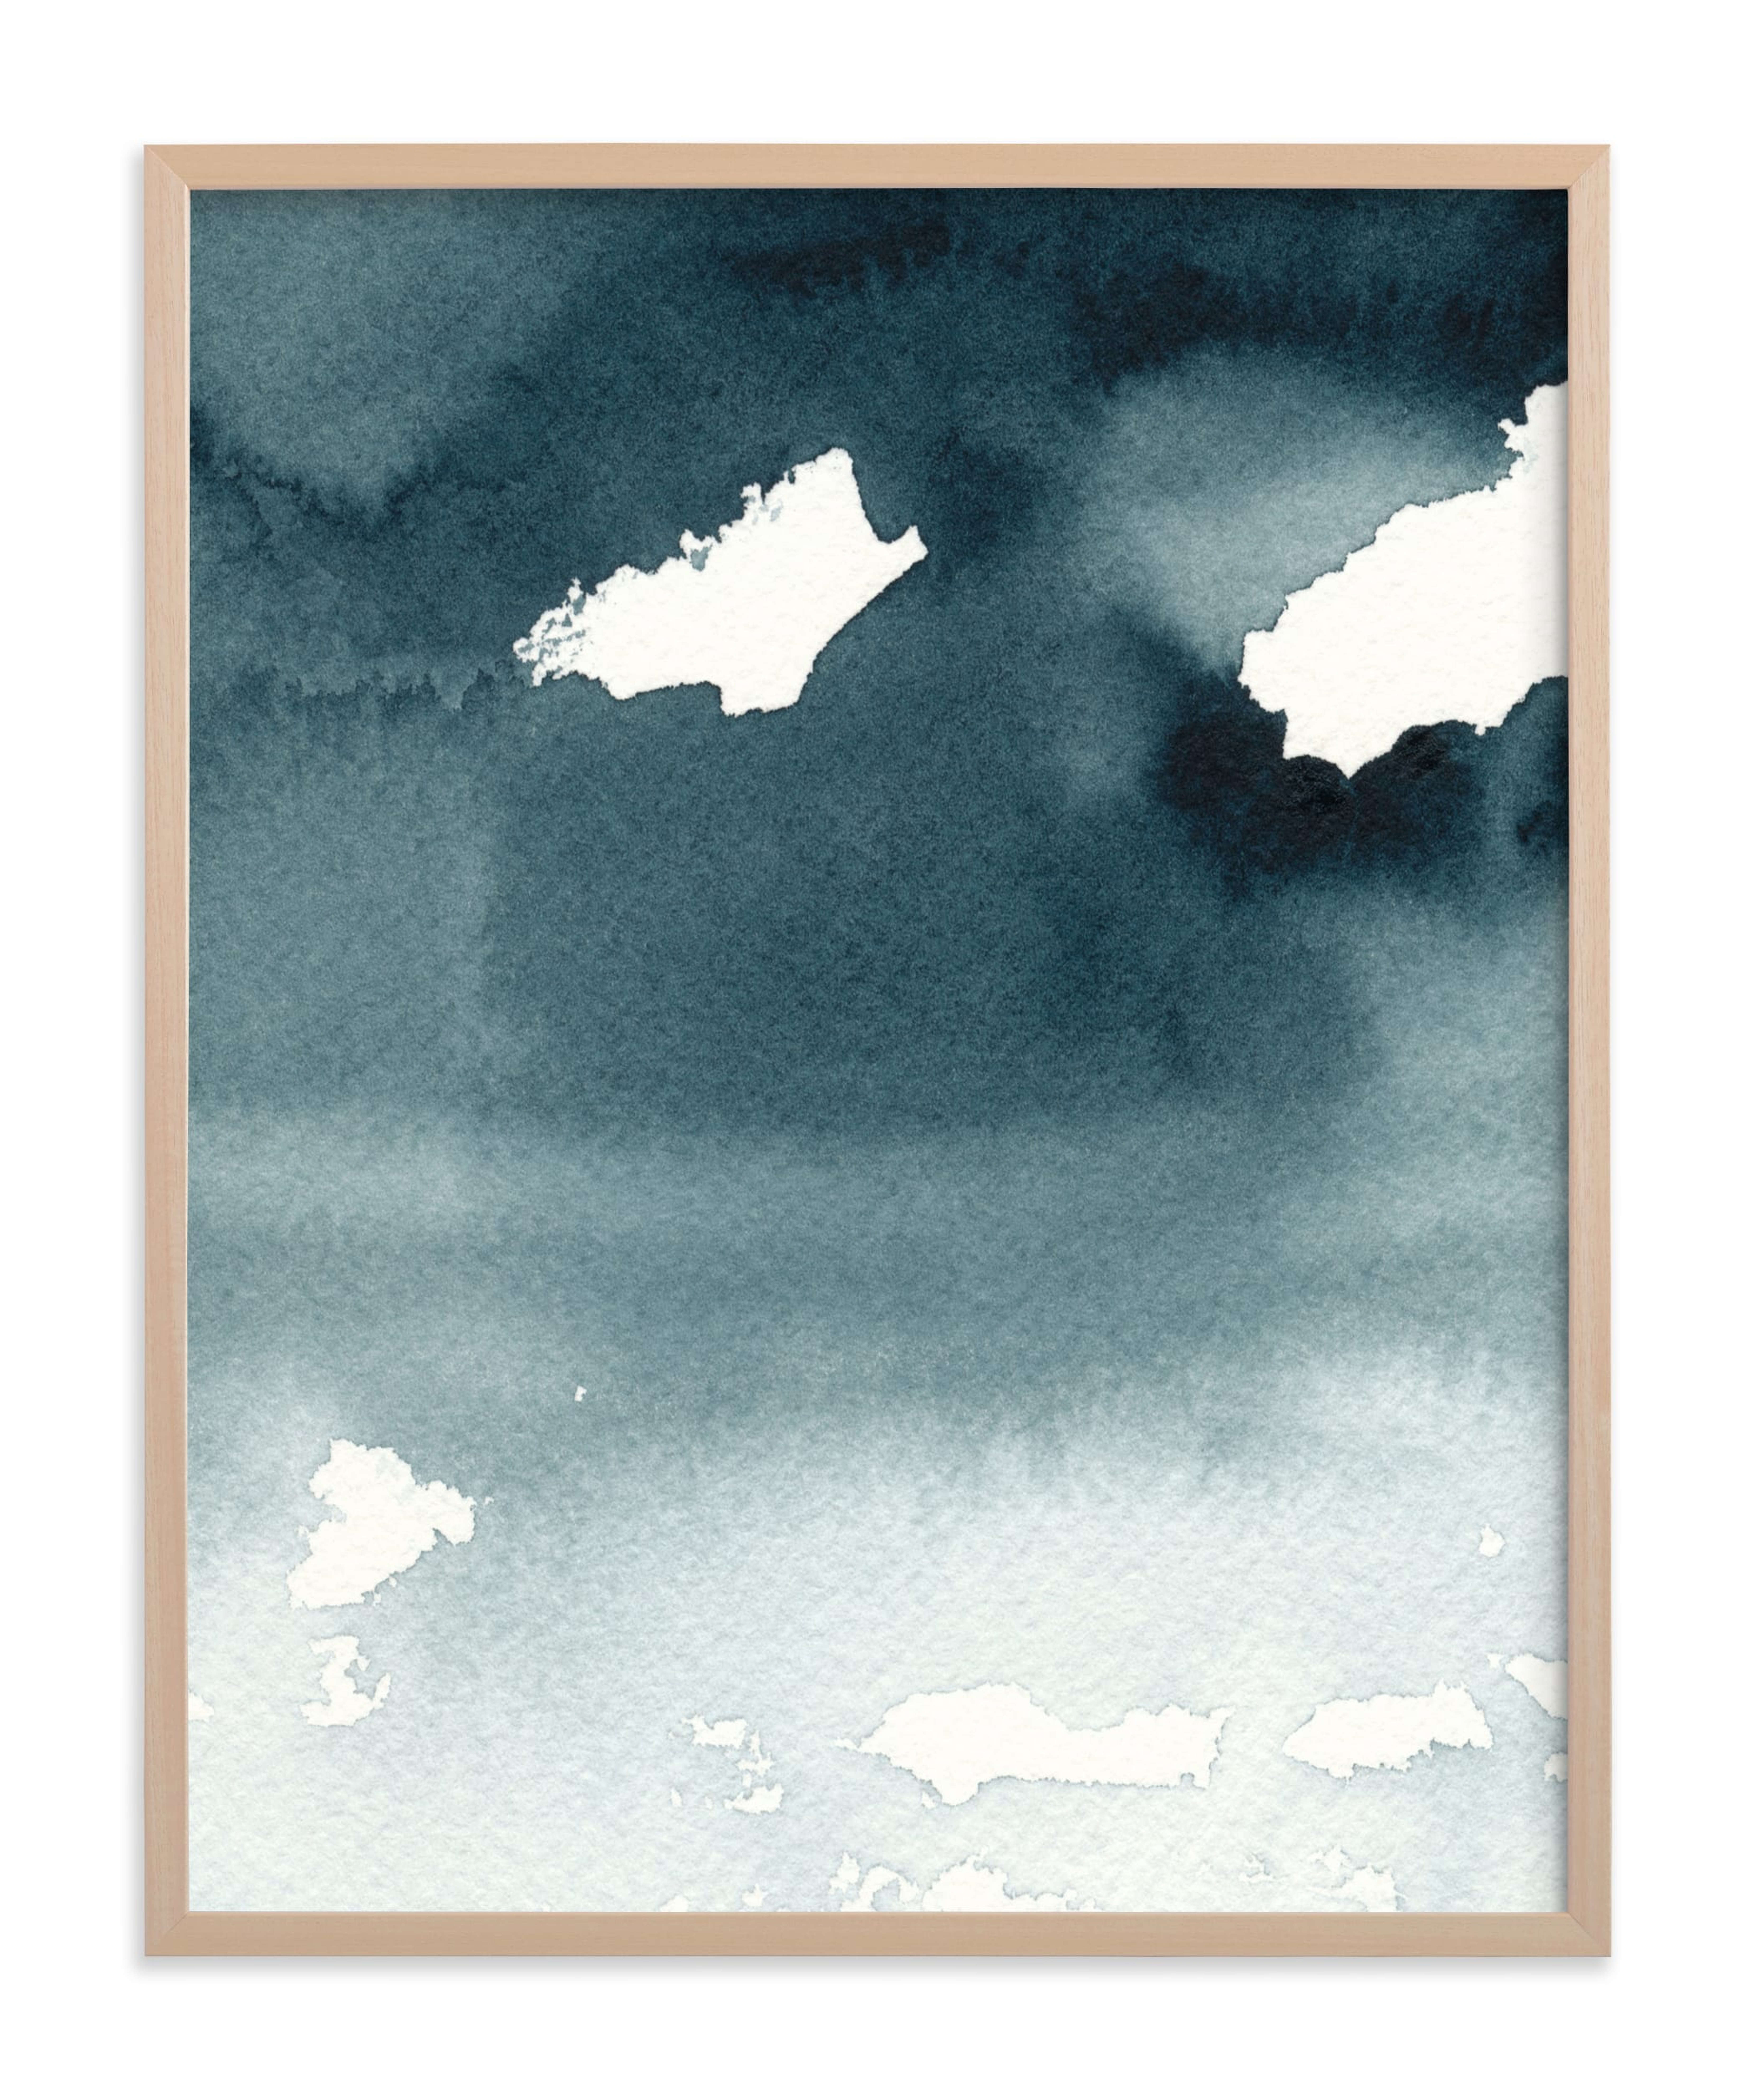 Mist Rises Over The Water Limited Edition Art Print - Minted